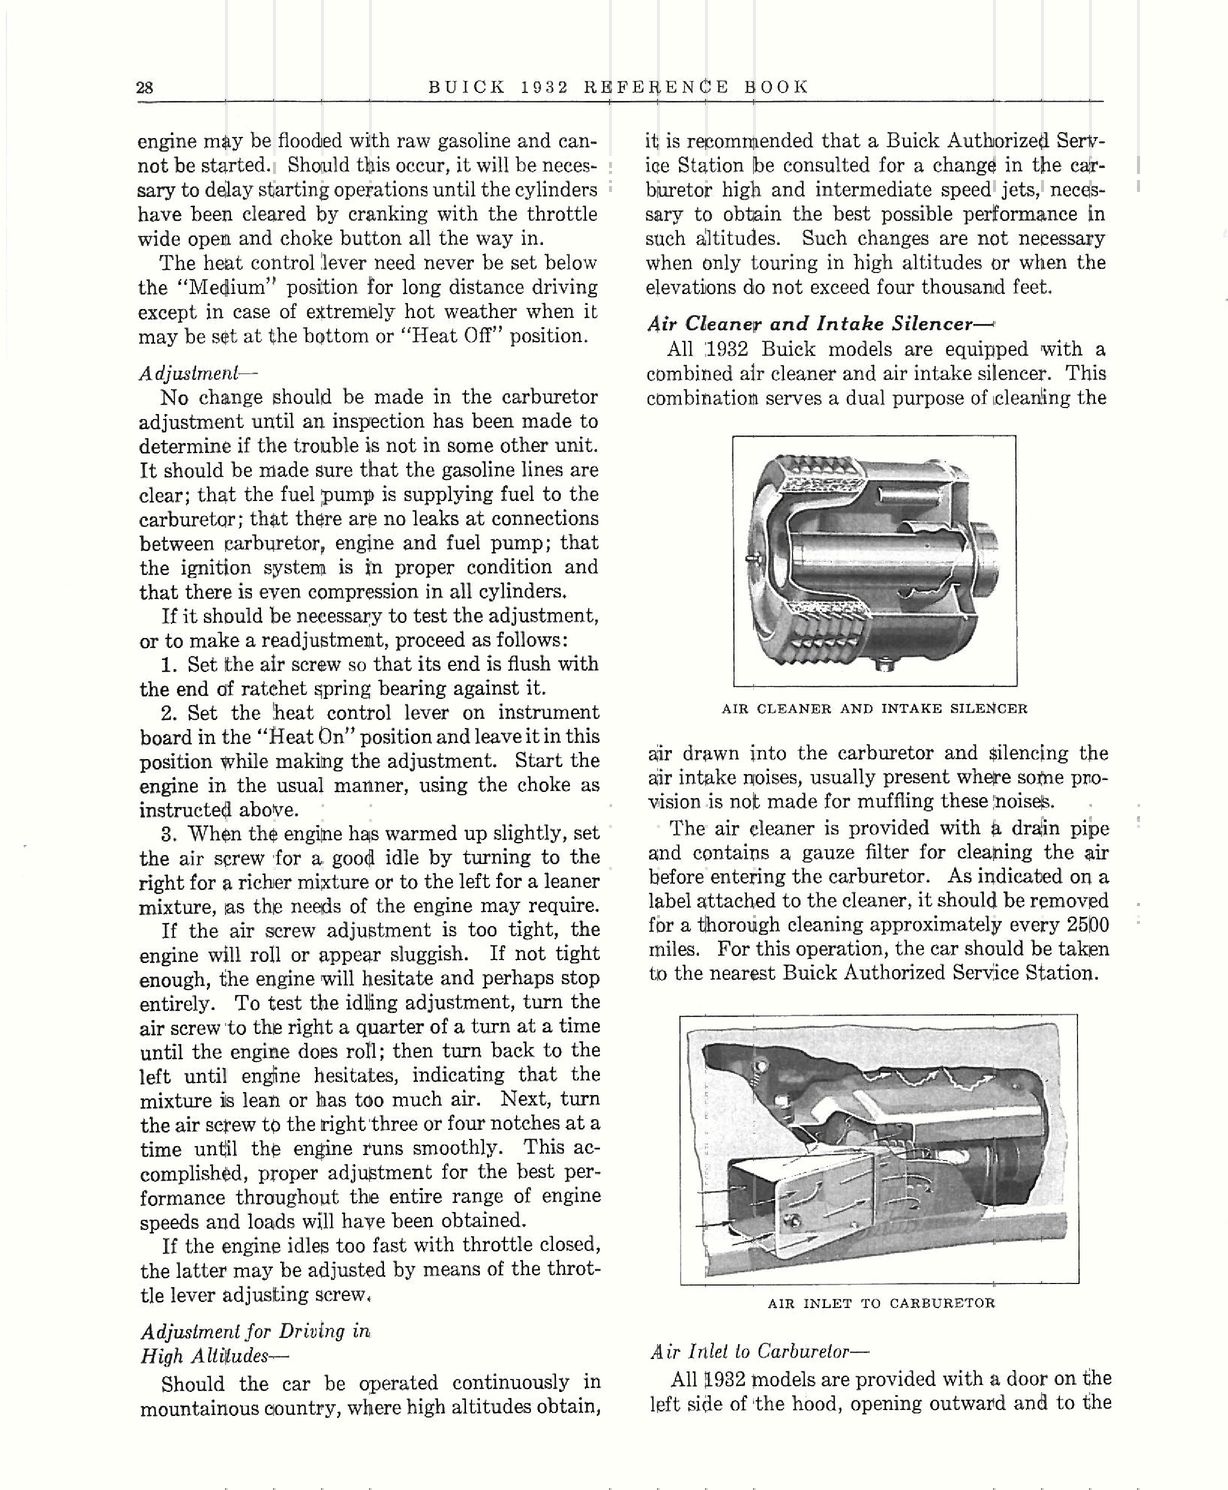 n_1932 Buick Reference Book-28.jpg